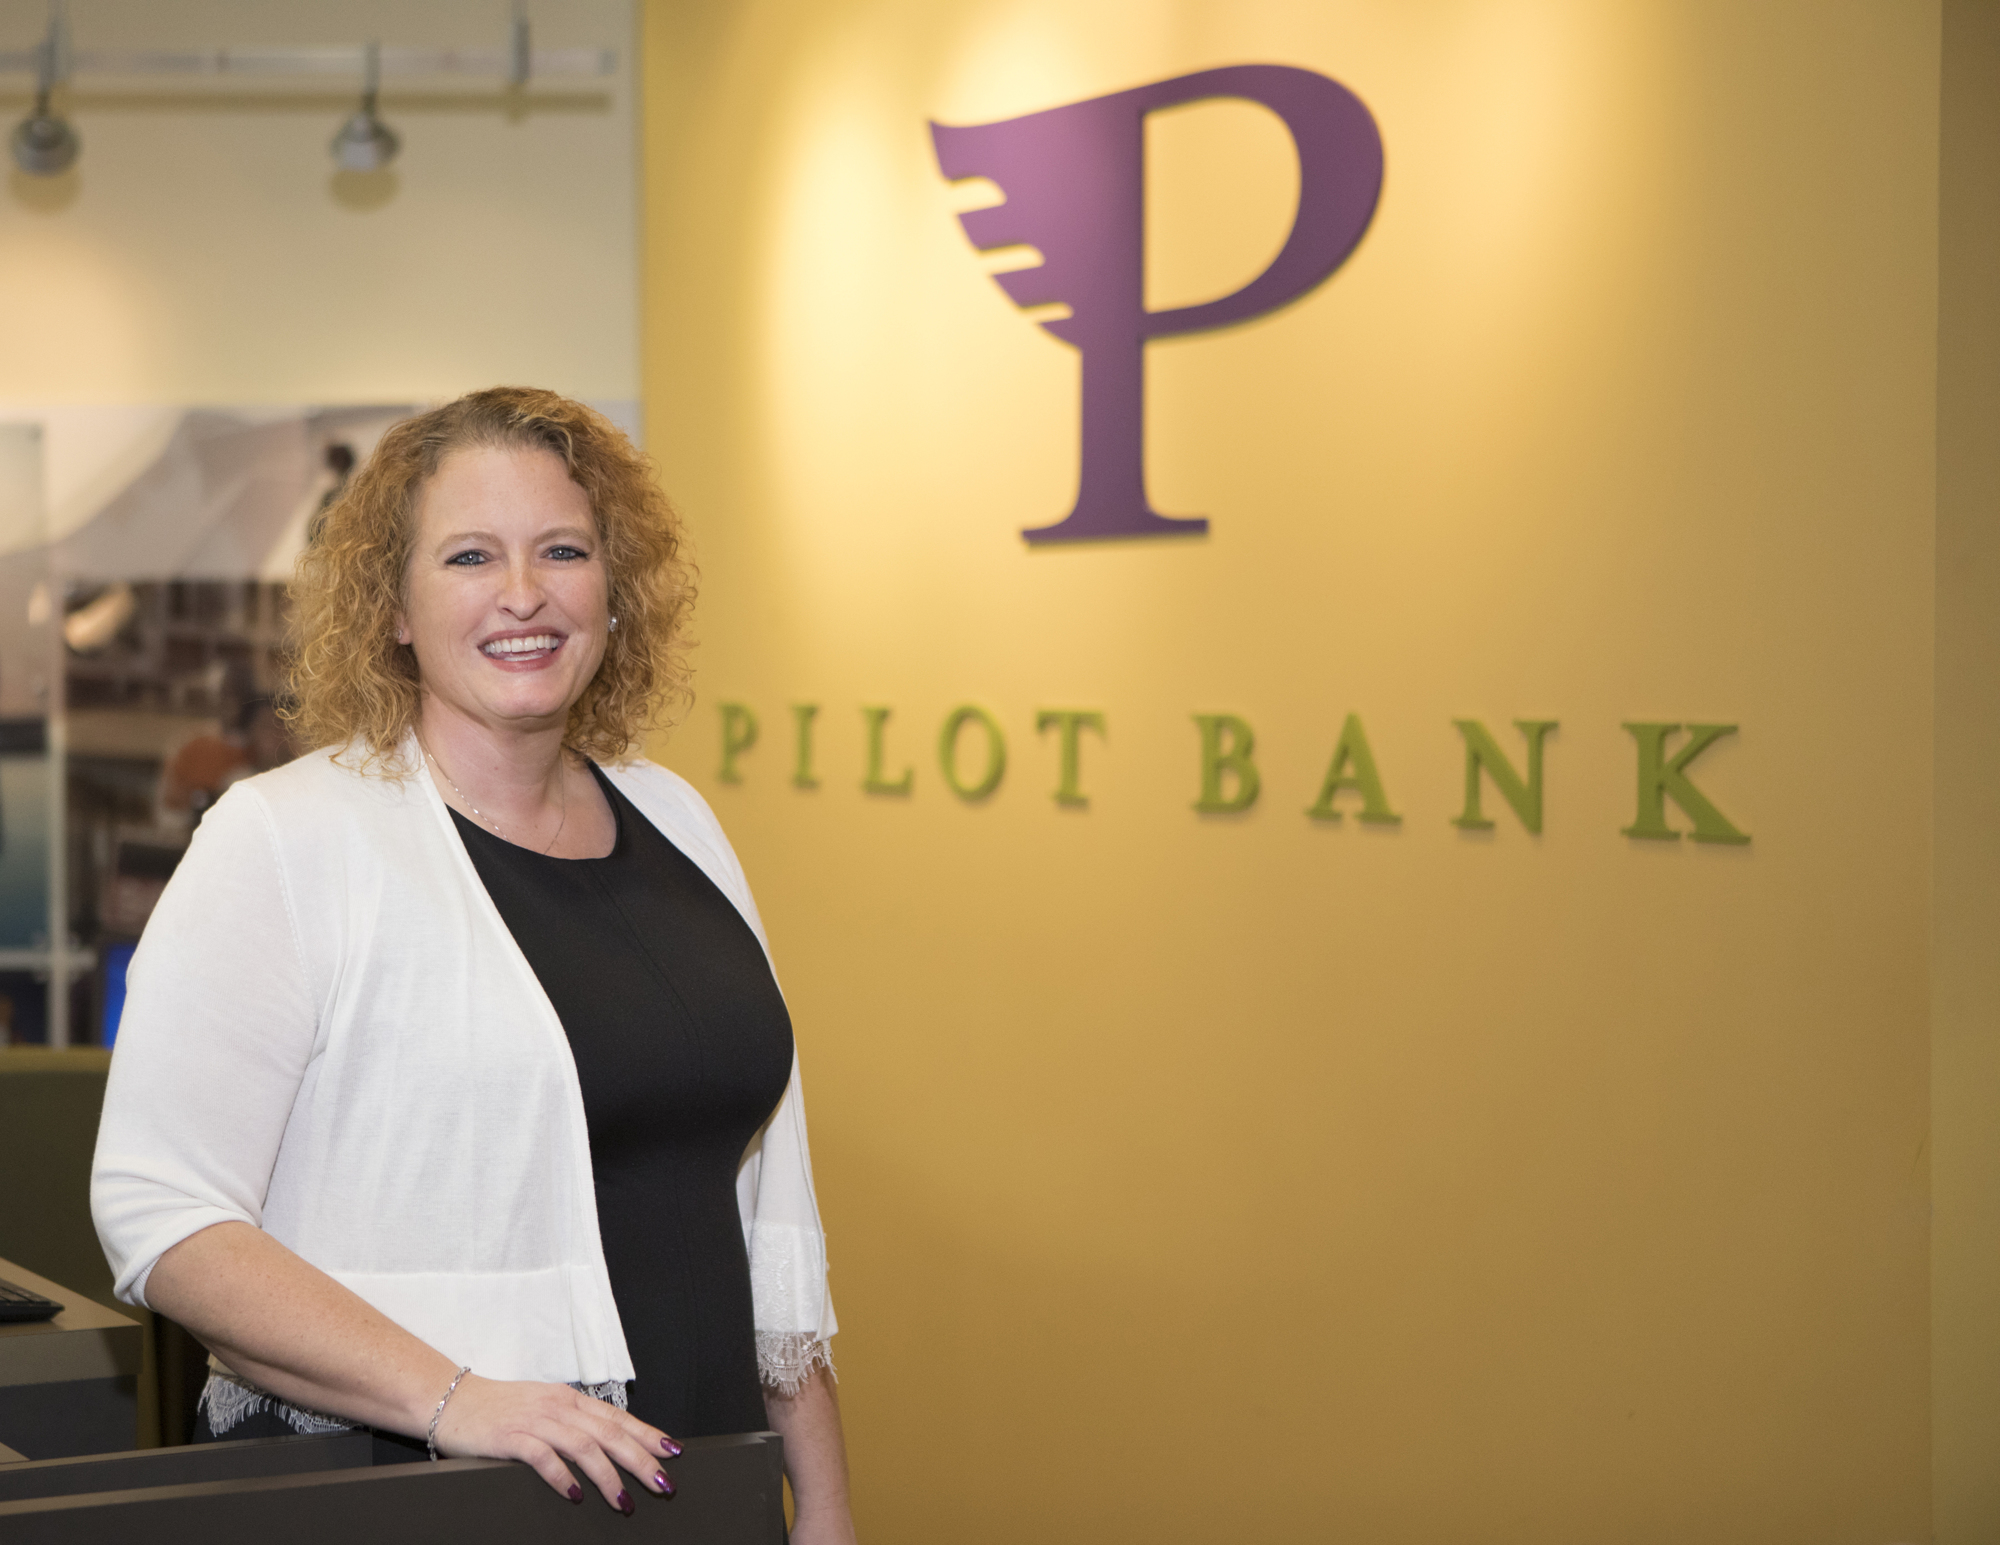 Mark Wemple. Jen Saylor with Pilot Bank in Tampa says community banks face stricter regulations than fintech firms.